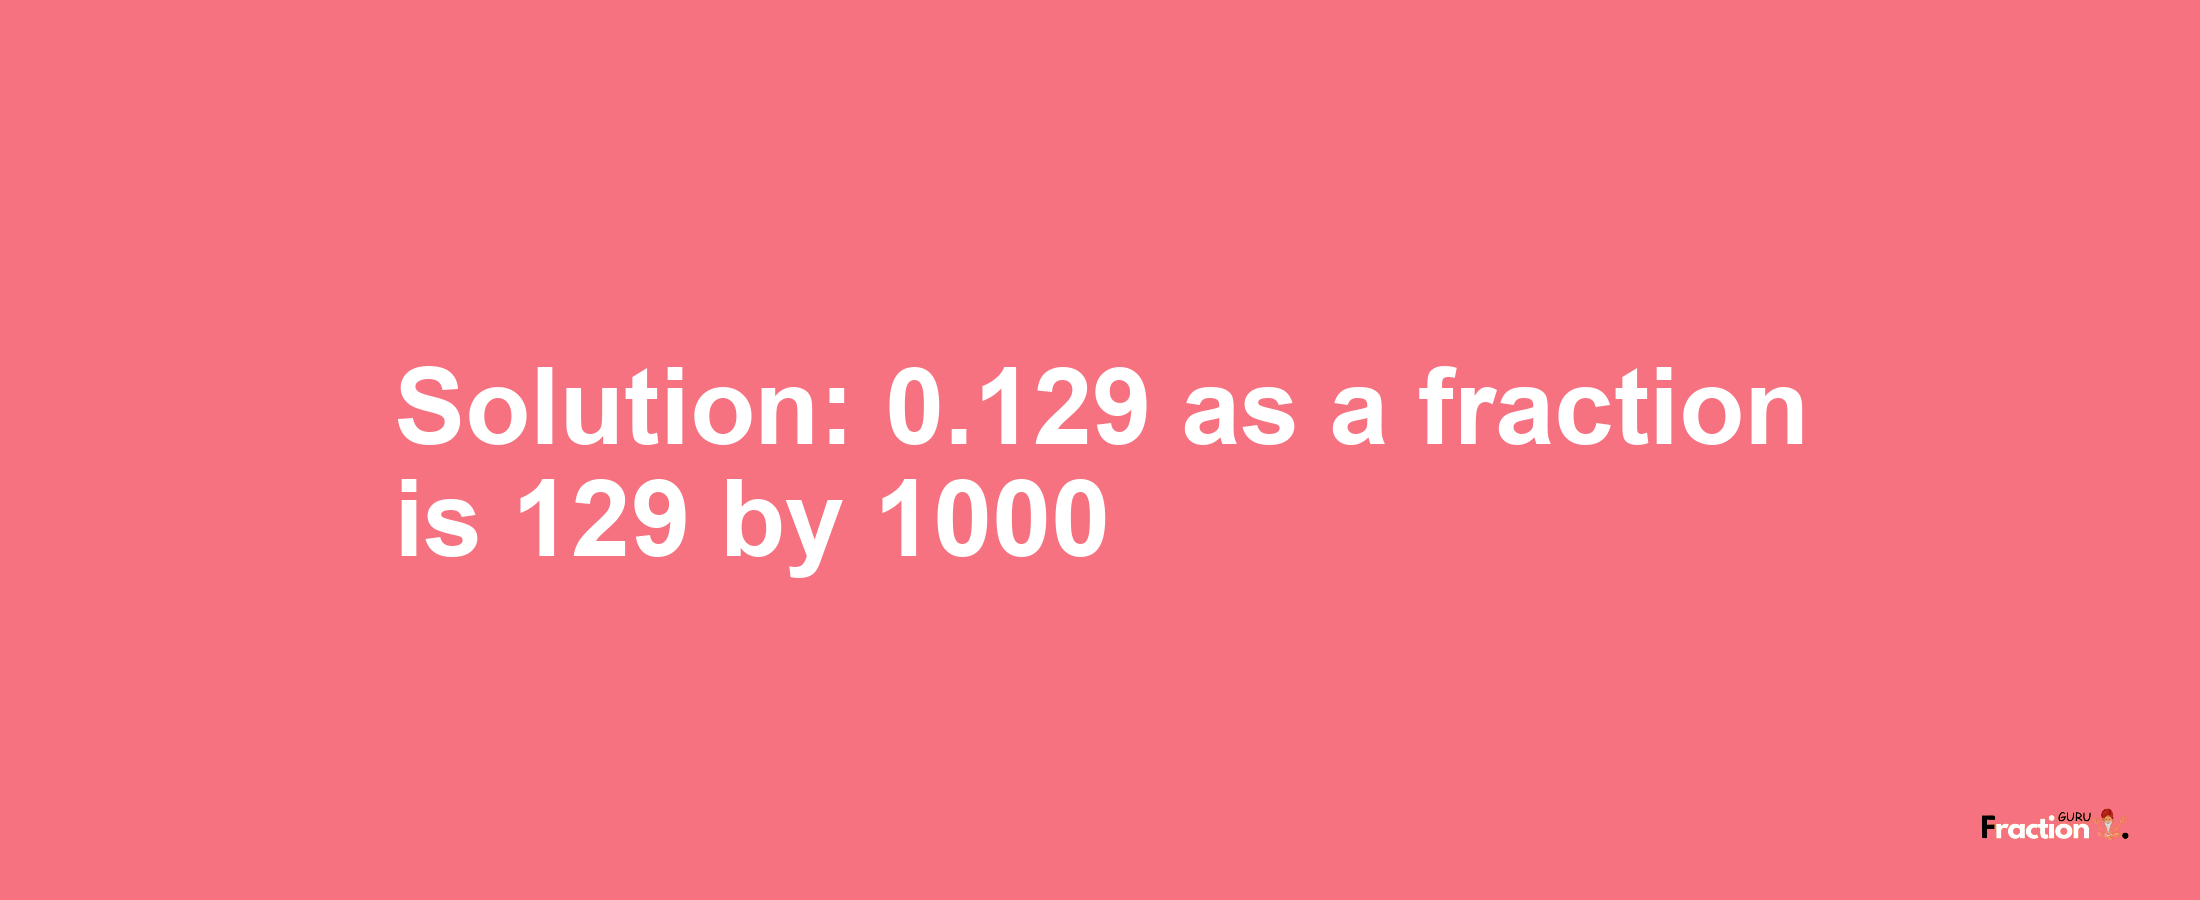 Solution:0.129 as a fraction is 129/1000